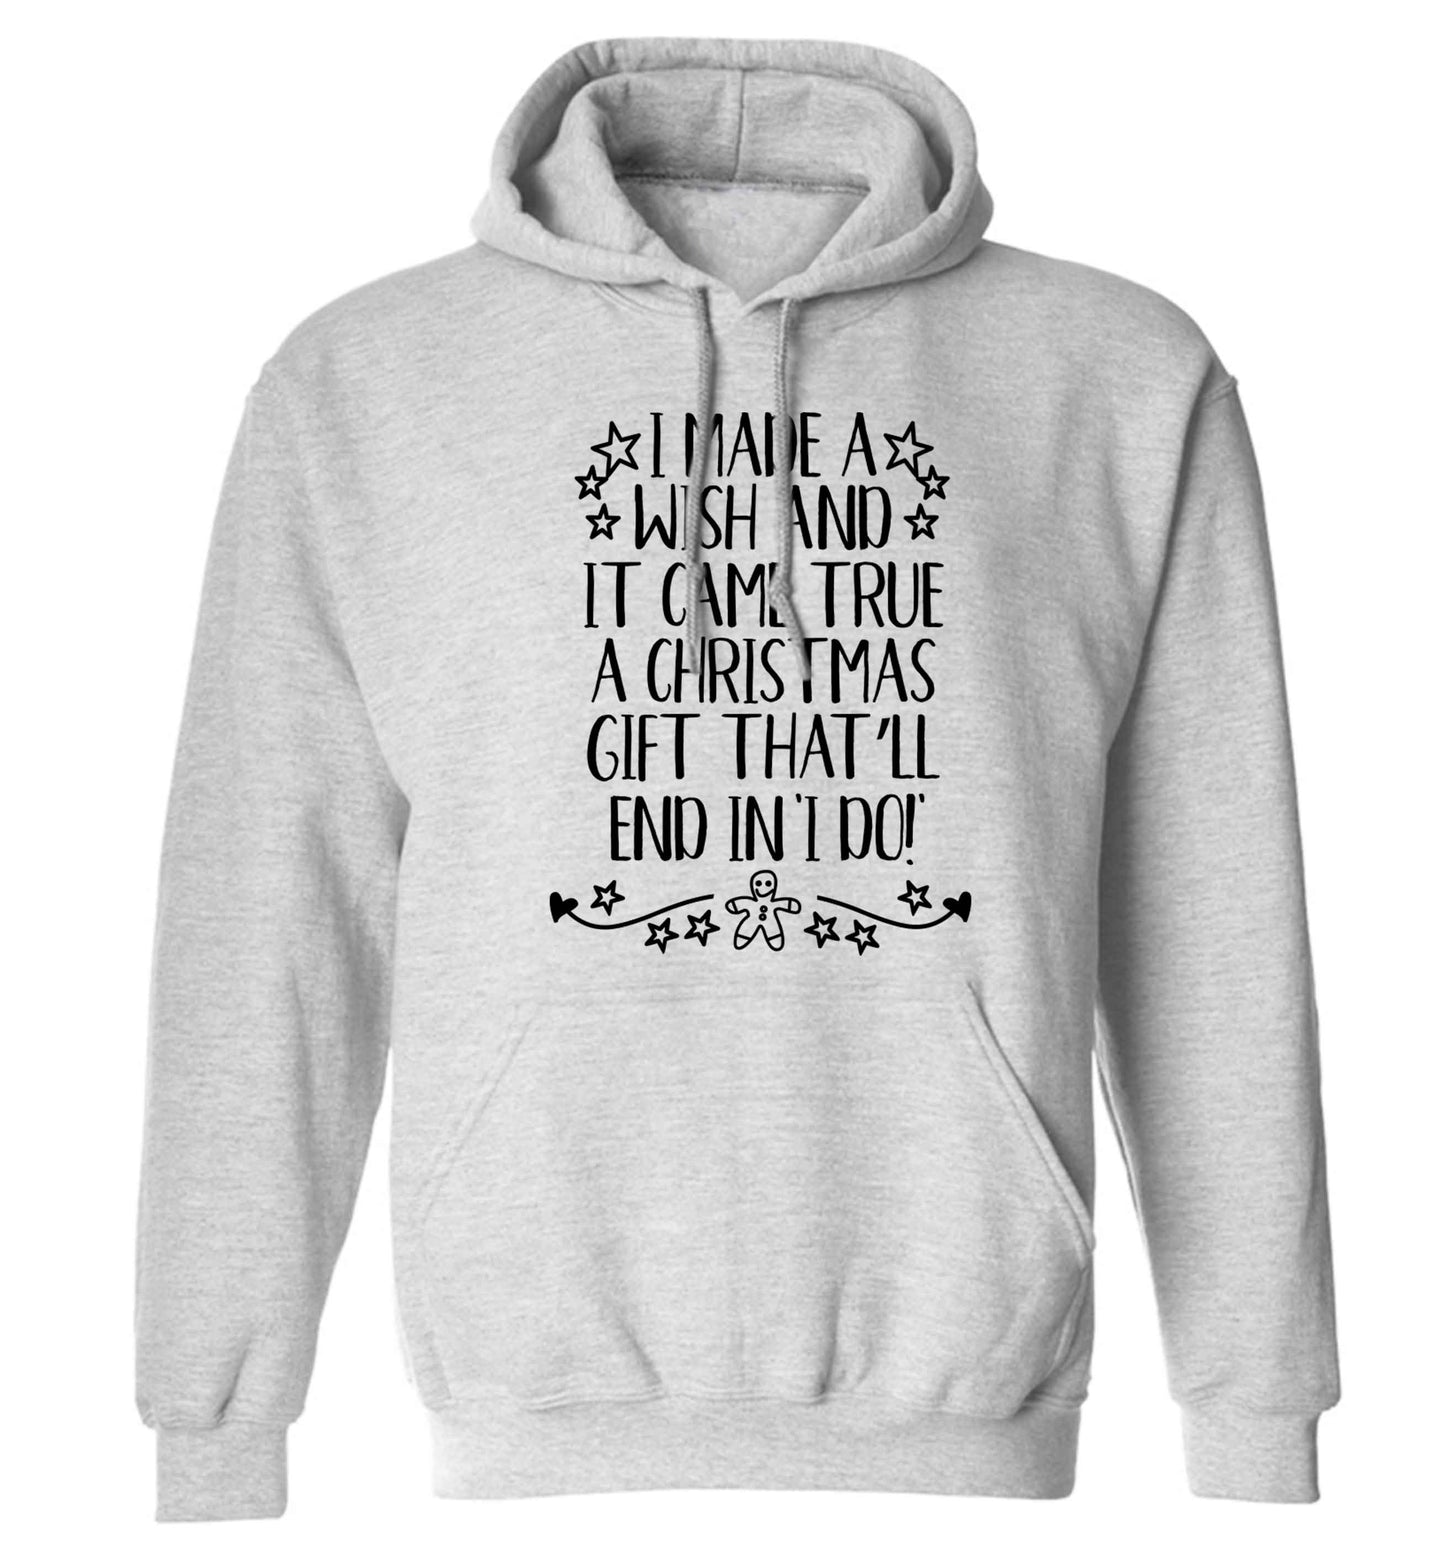 I made a wish and it came true a Christmas gift that'll end in 'I do' adults unisex grey hoodie 2XL